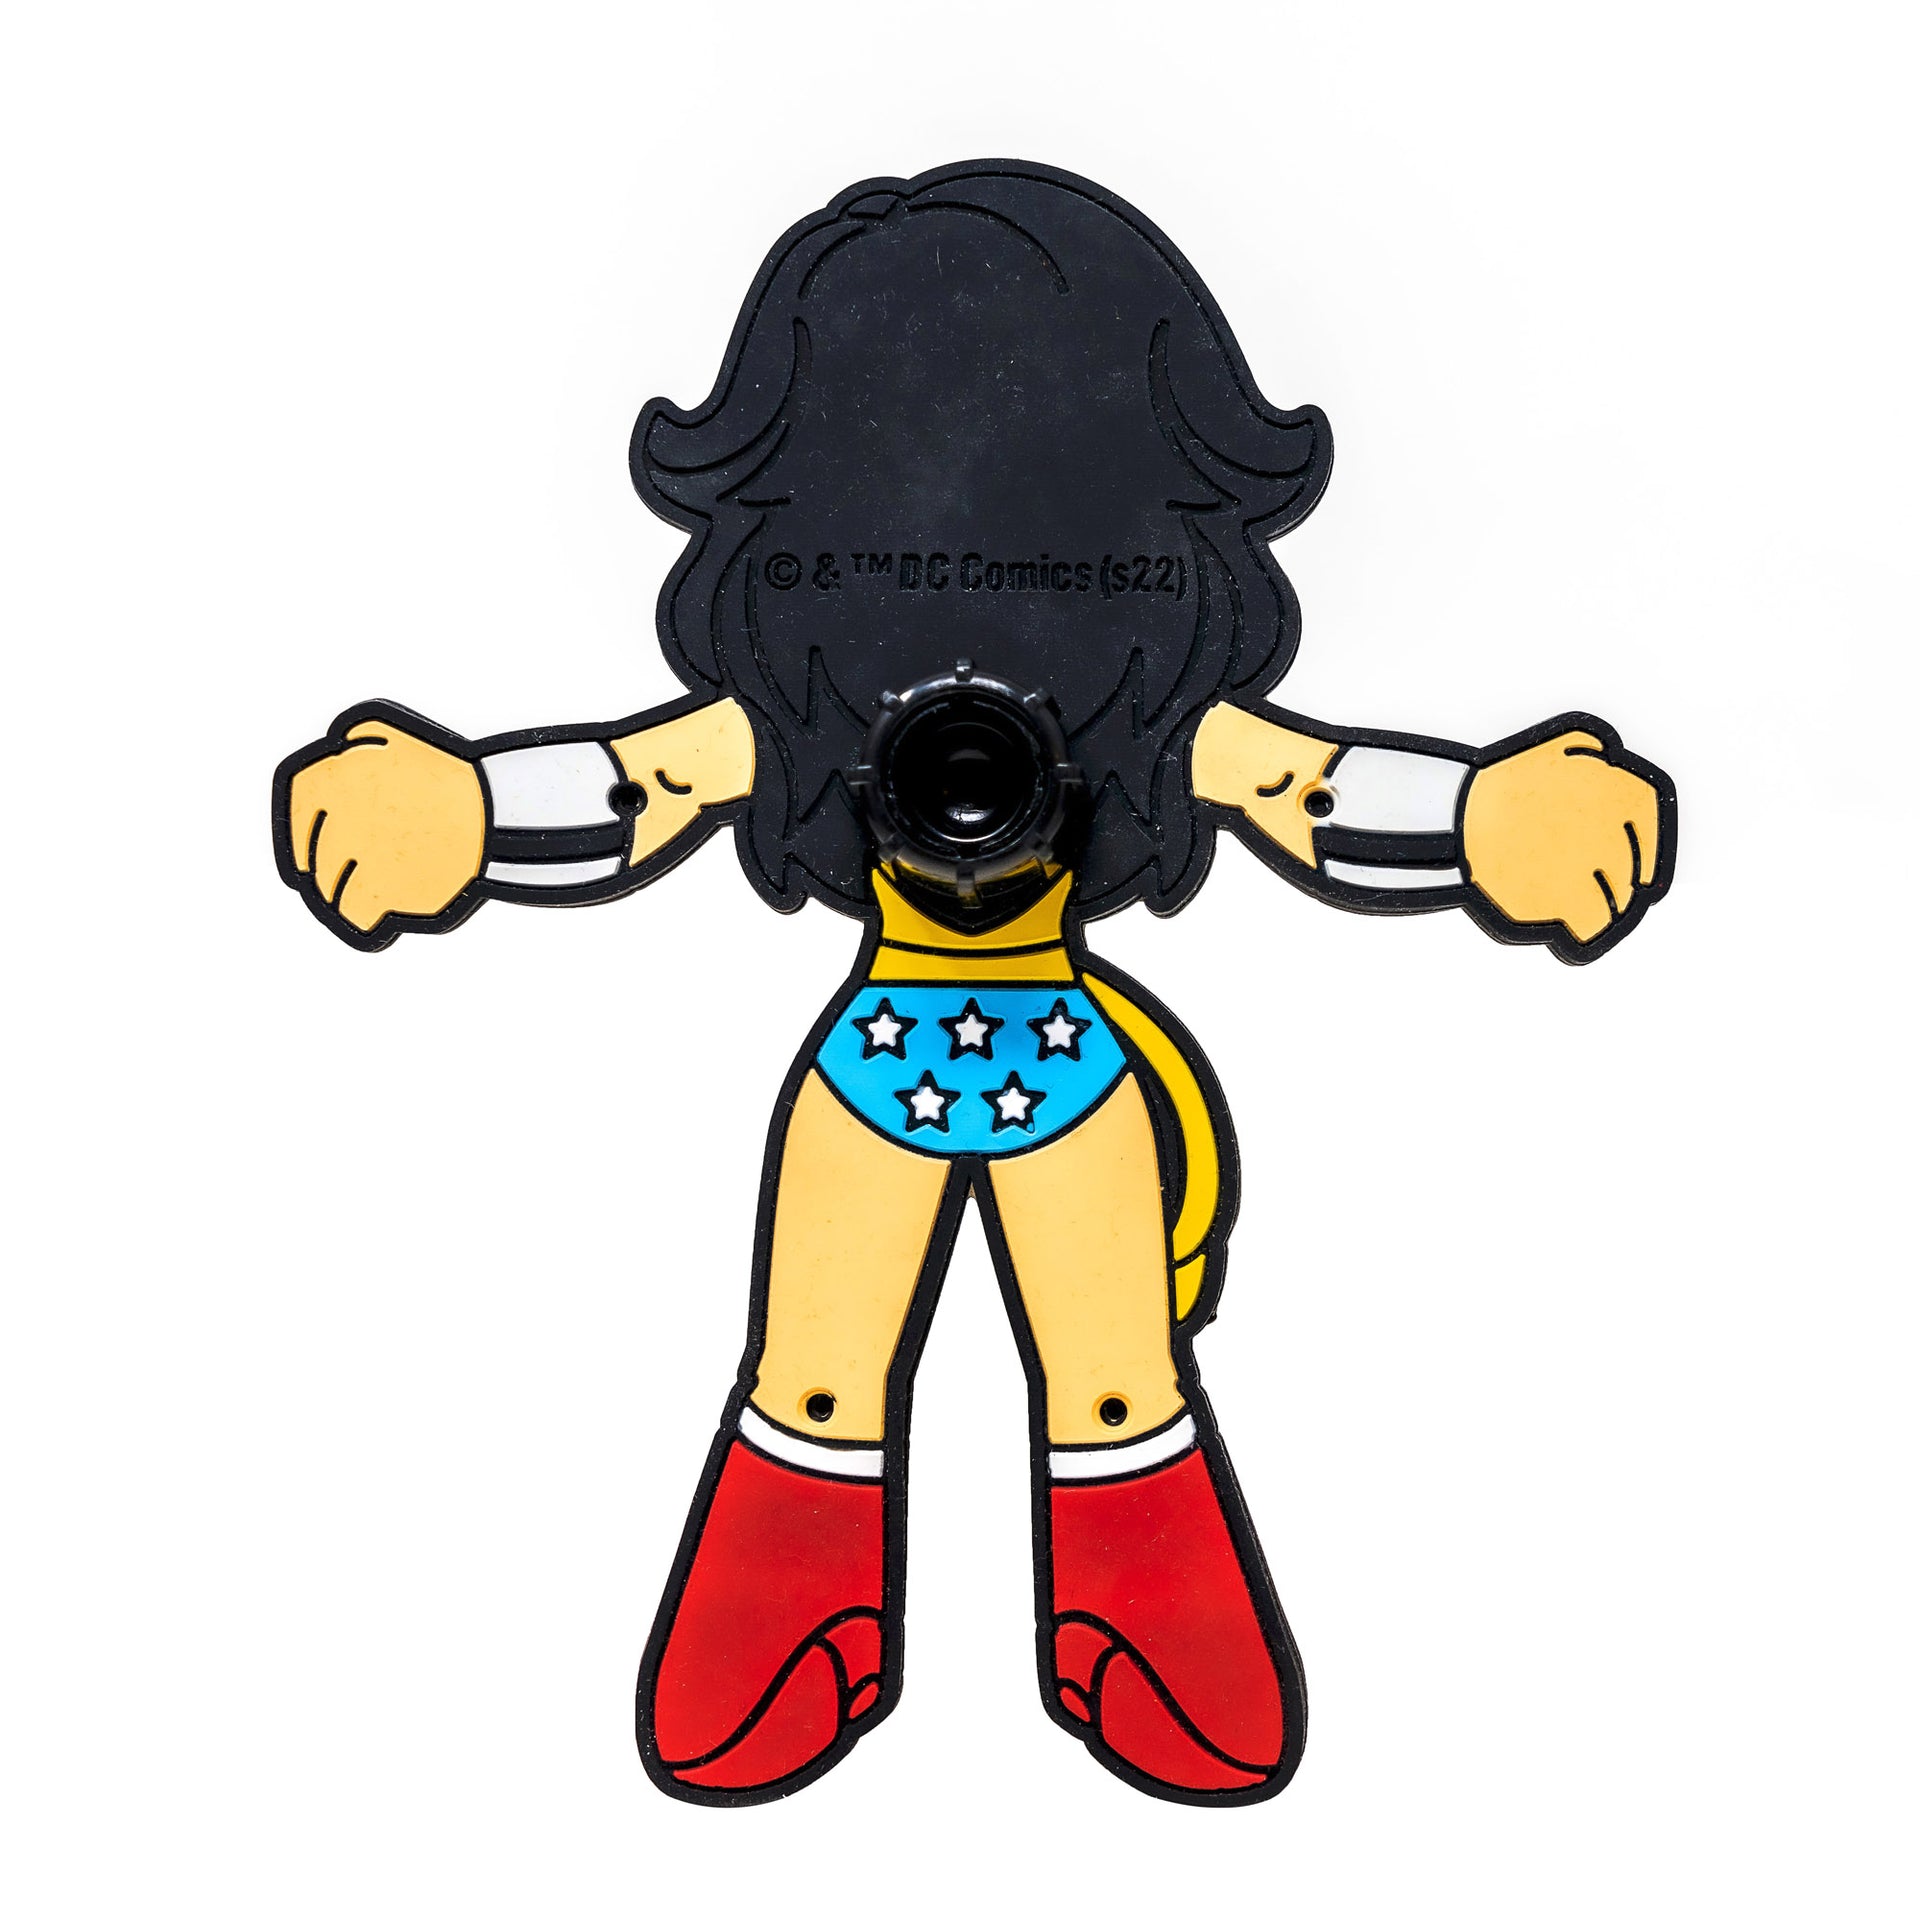 Image of DC Comics Wonder Woman Hug Buddy from the back showing its vent clip holder on a white background